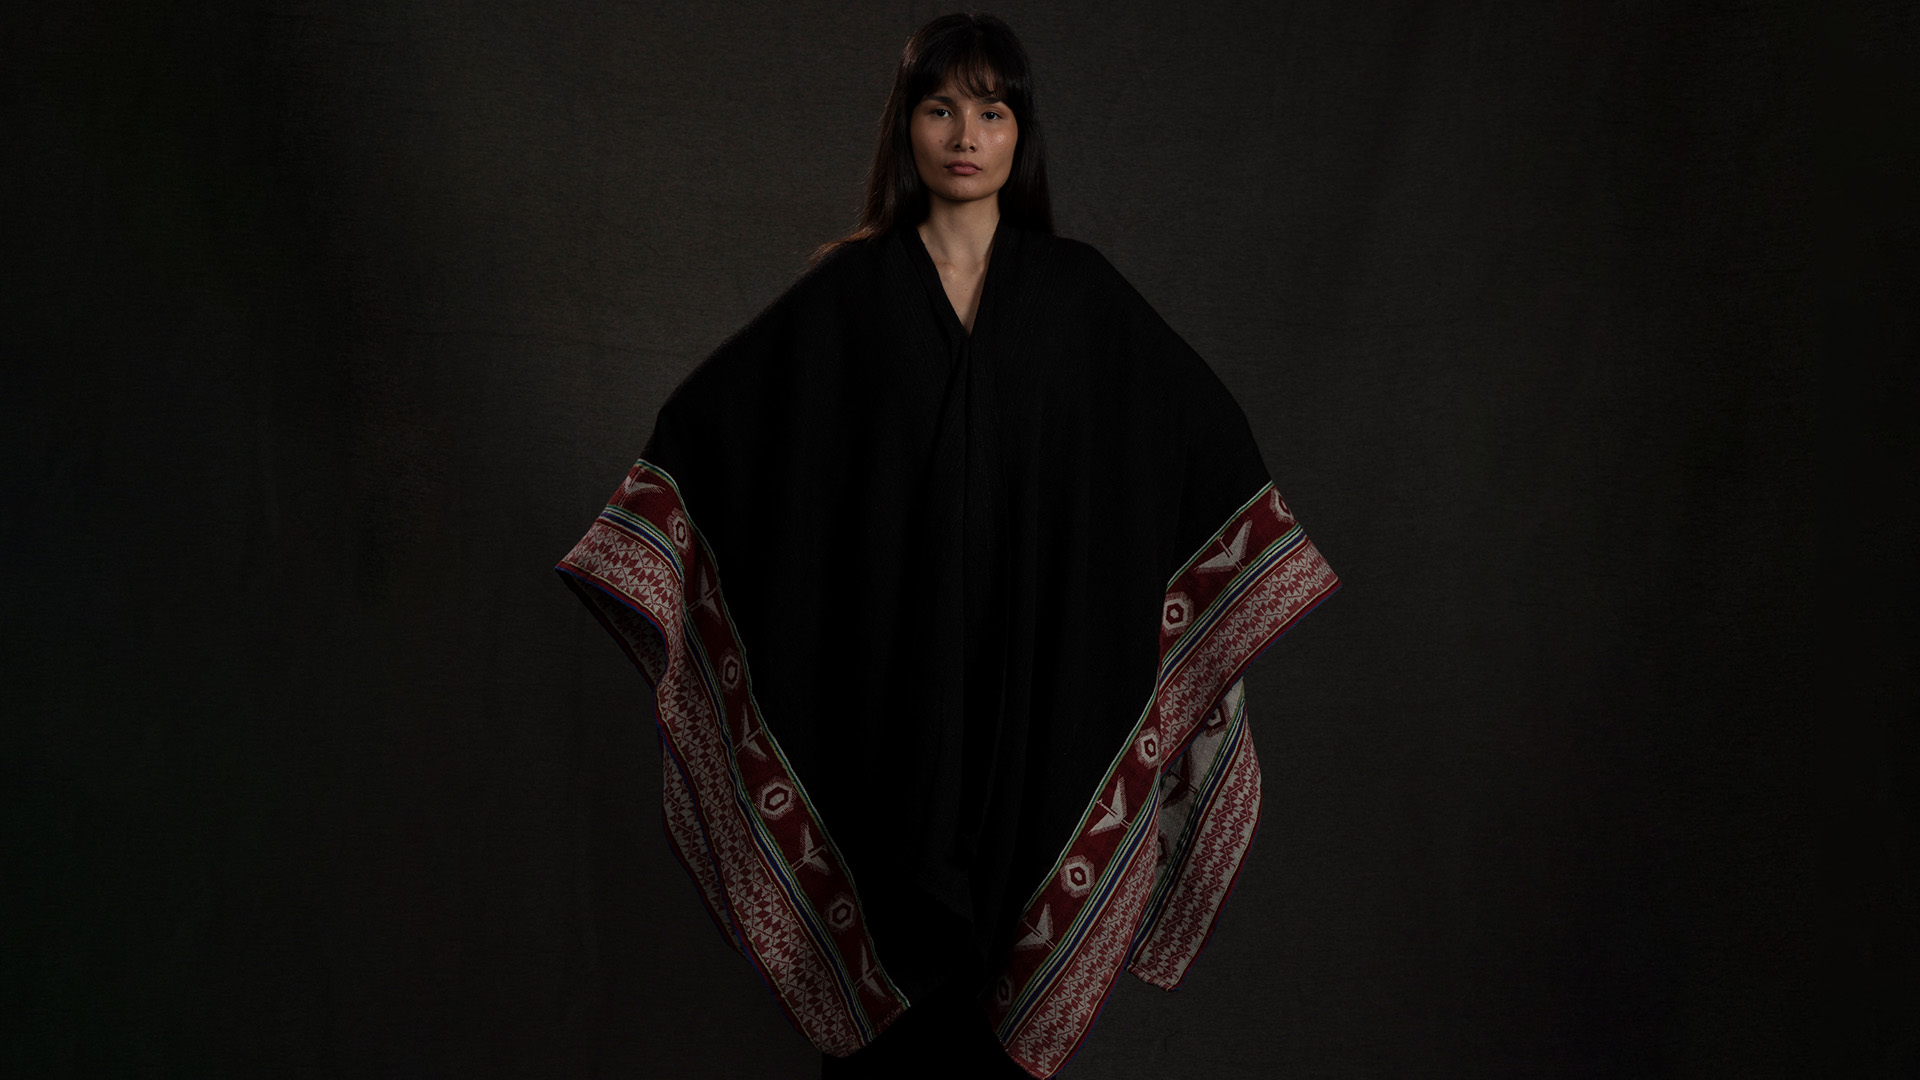 cape with indigenous patterns at the hem